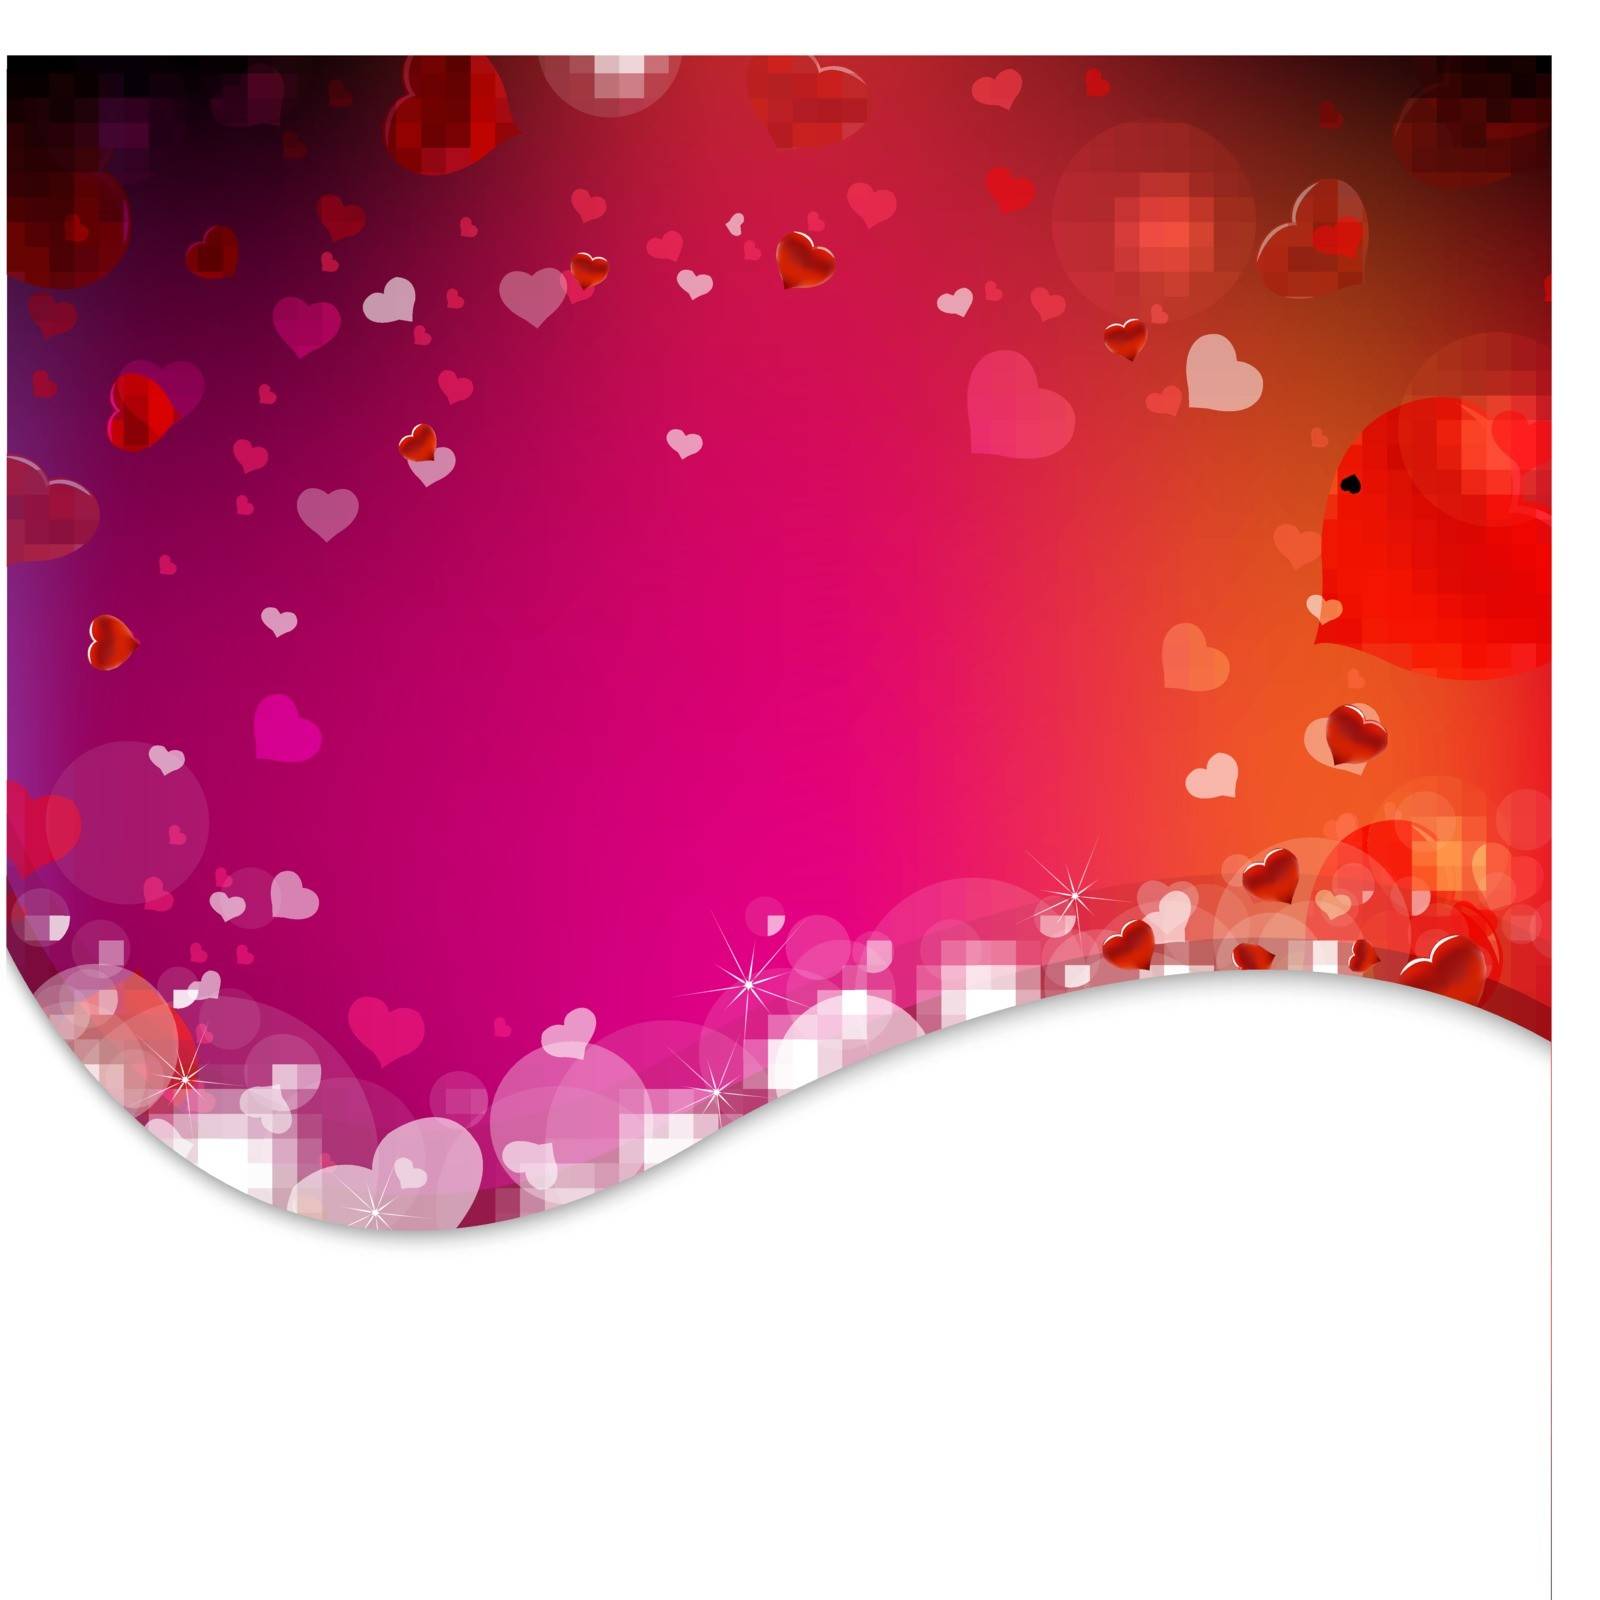 Background From Blur And Hearts With Gradient Mesh, Vector Illustration